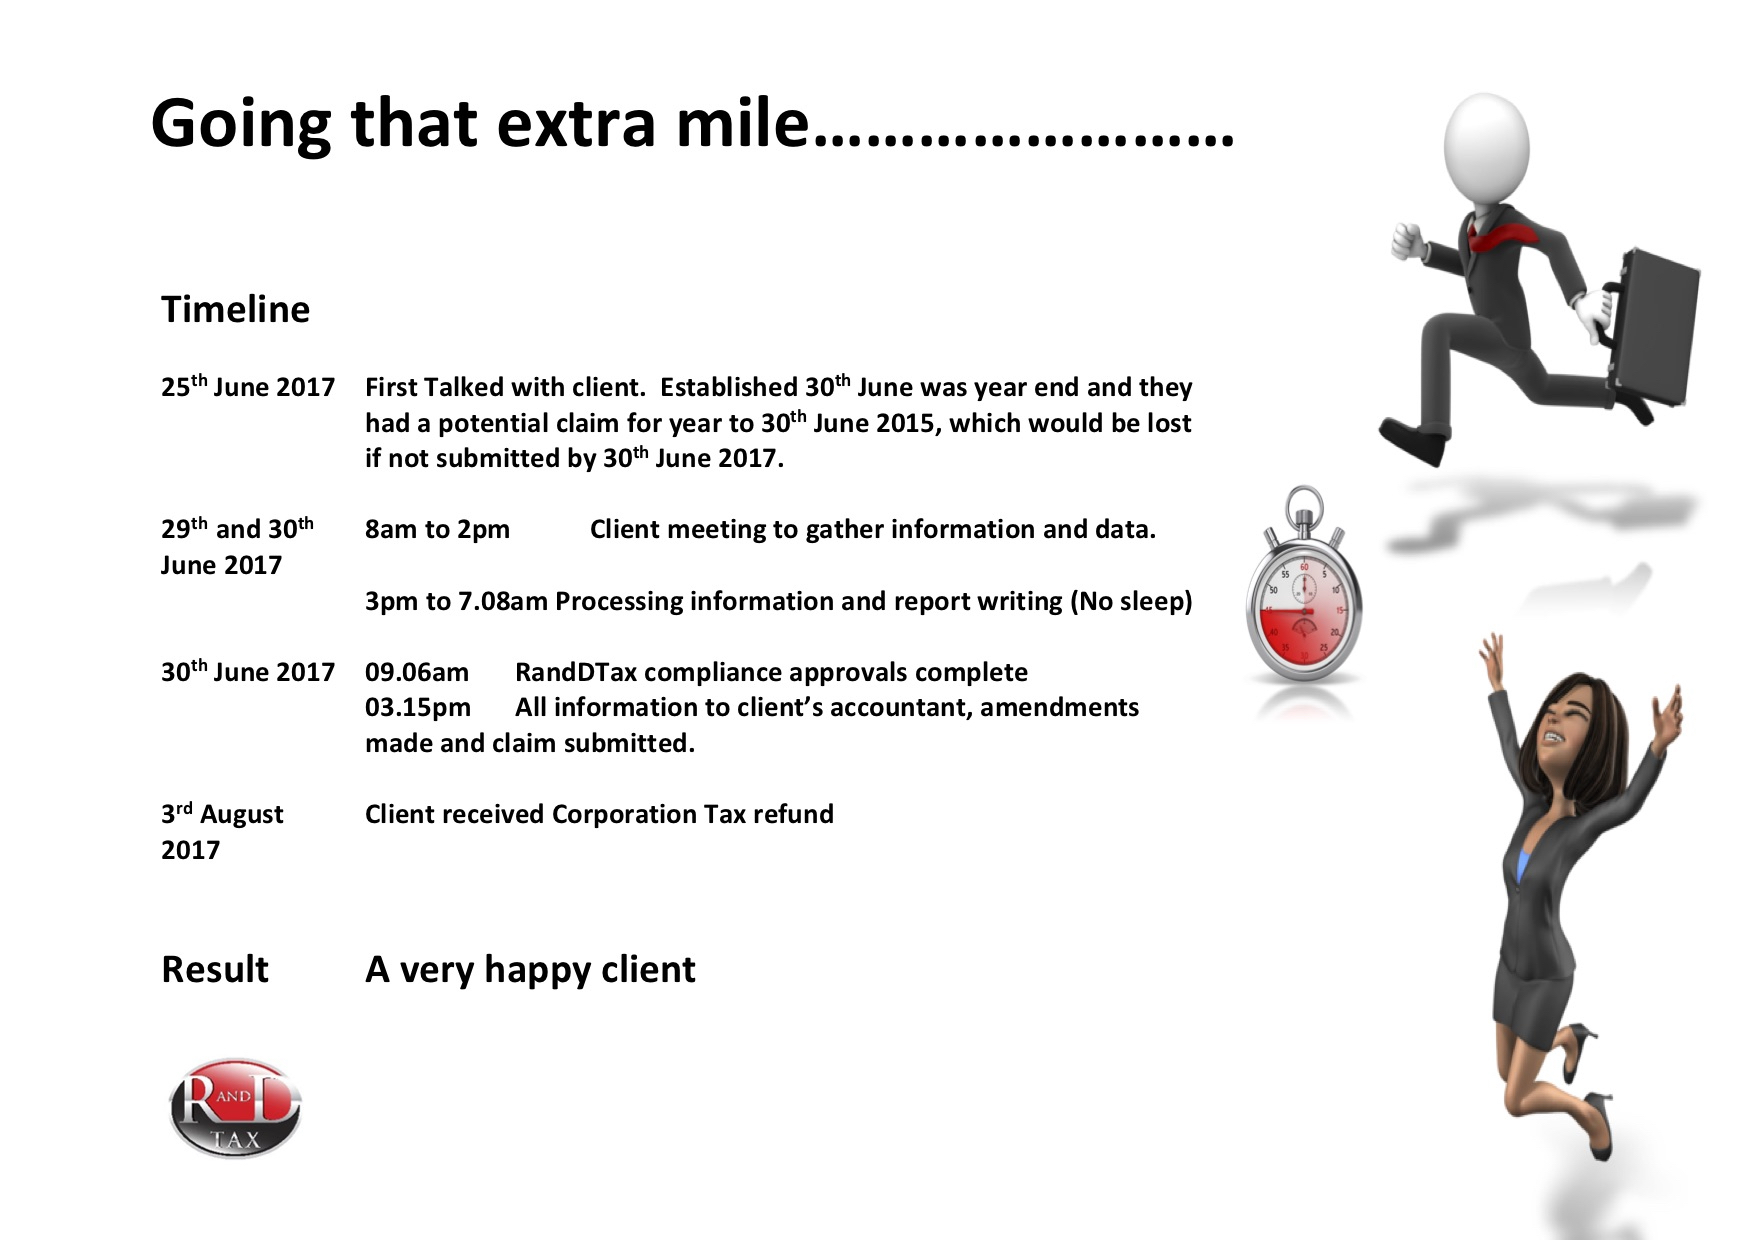 RAndD TaX GO THE EXTRA MILE FOR CLIENTS